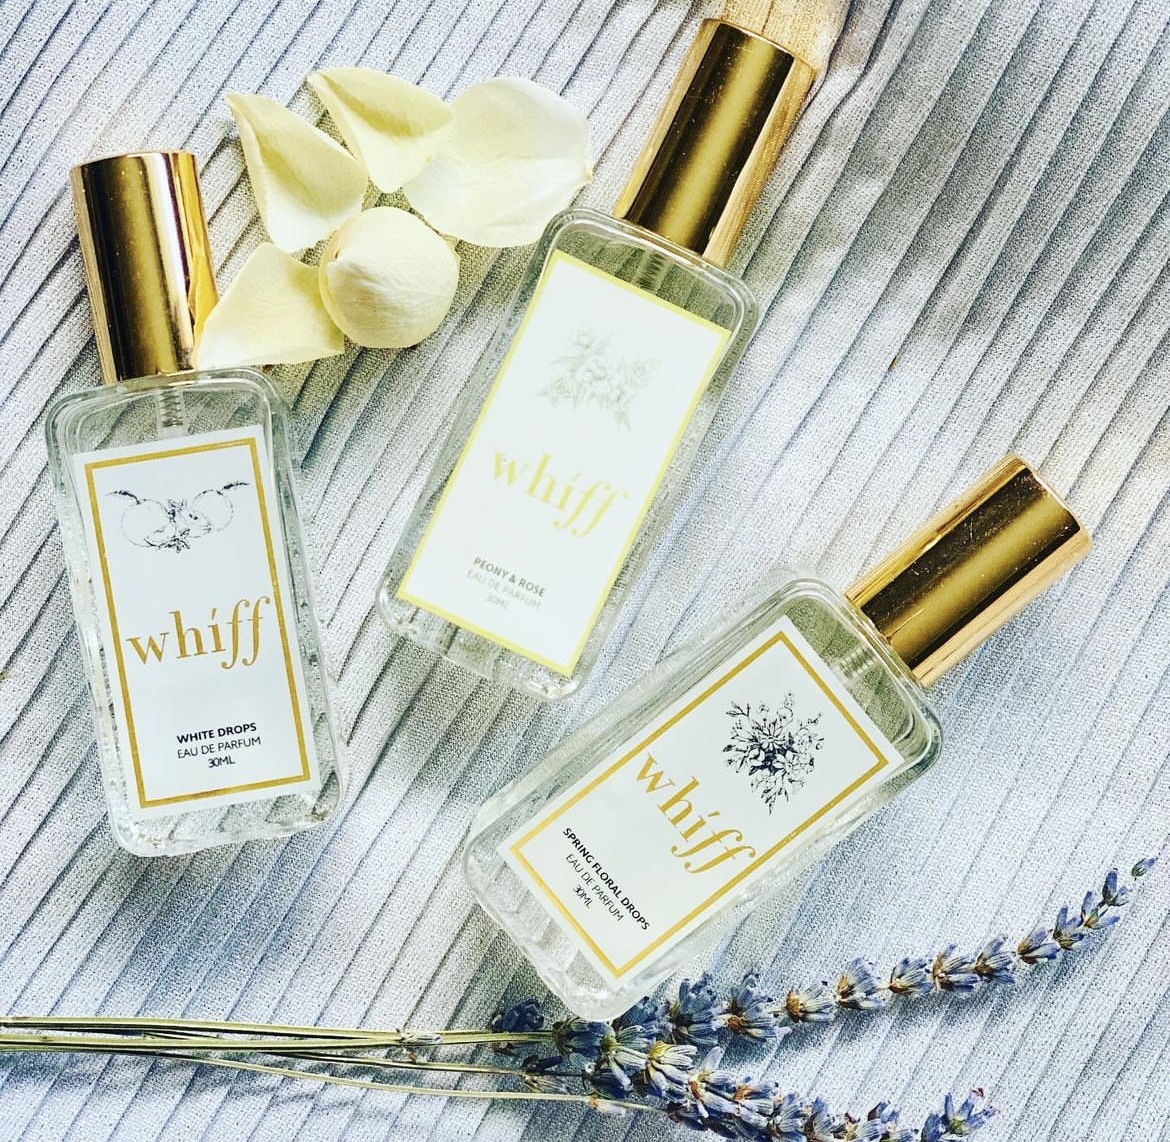 8 filipino-made fragrances to try local scents